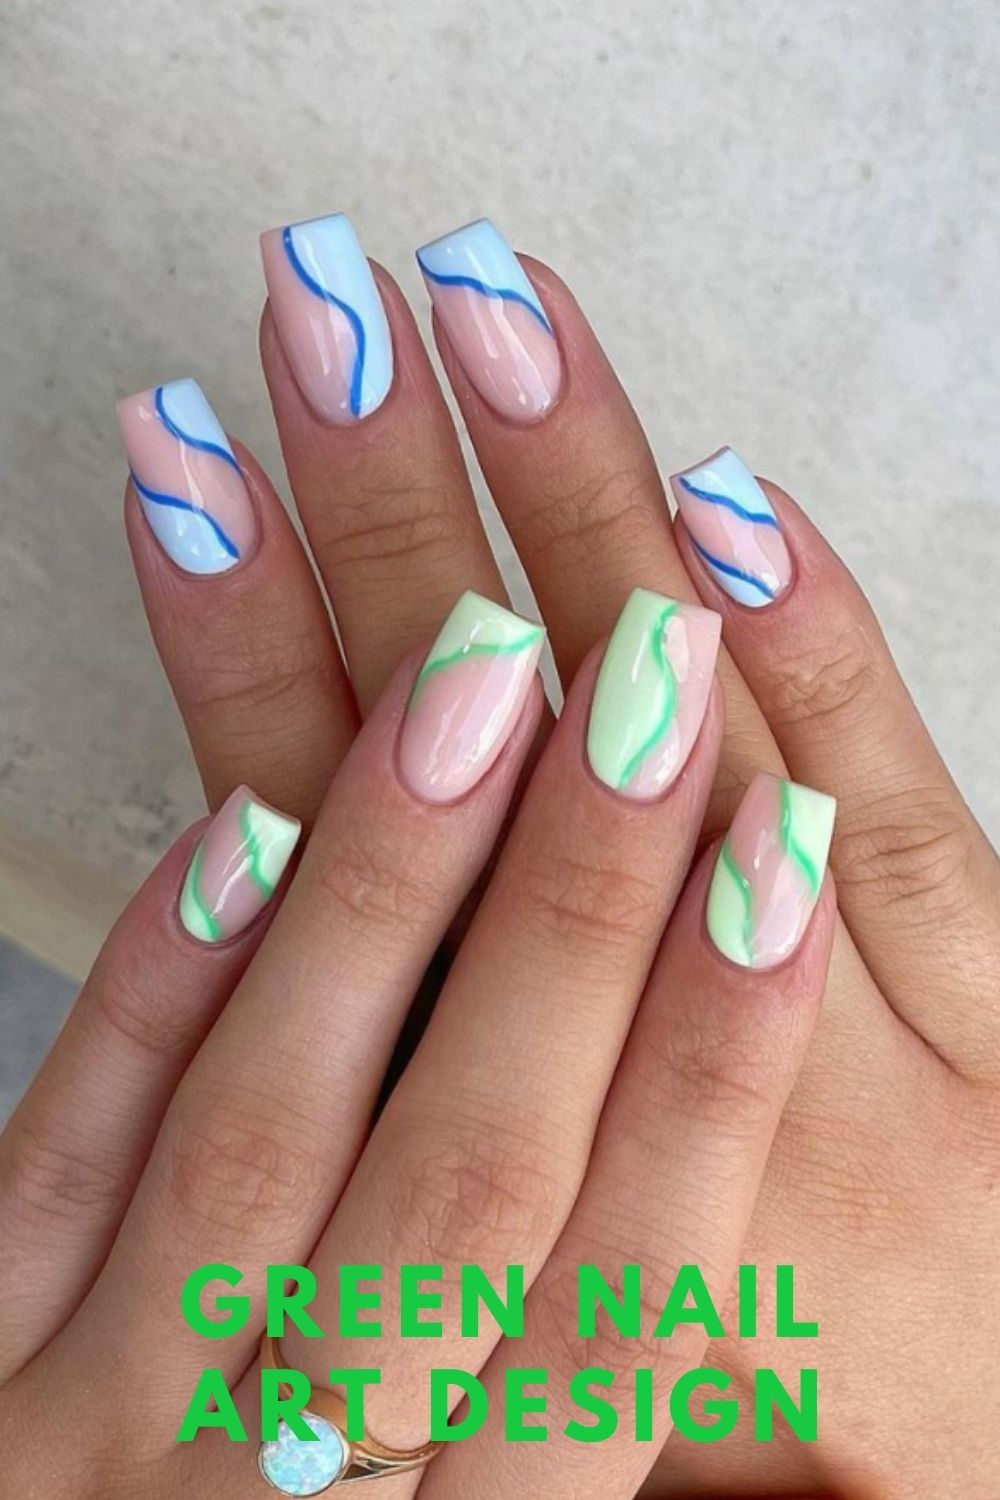 Light blue and blue, light green and green nails